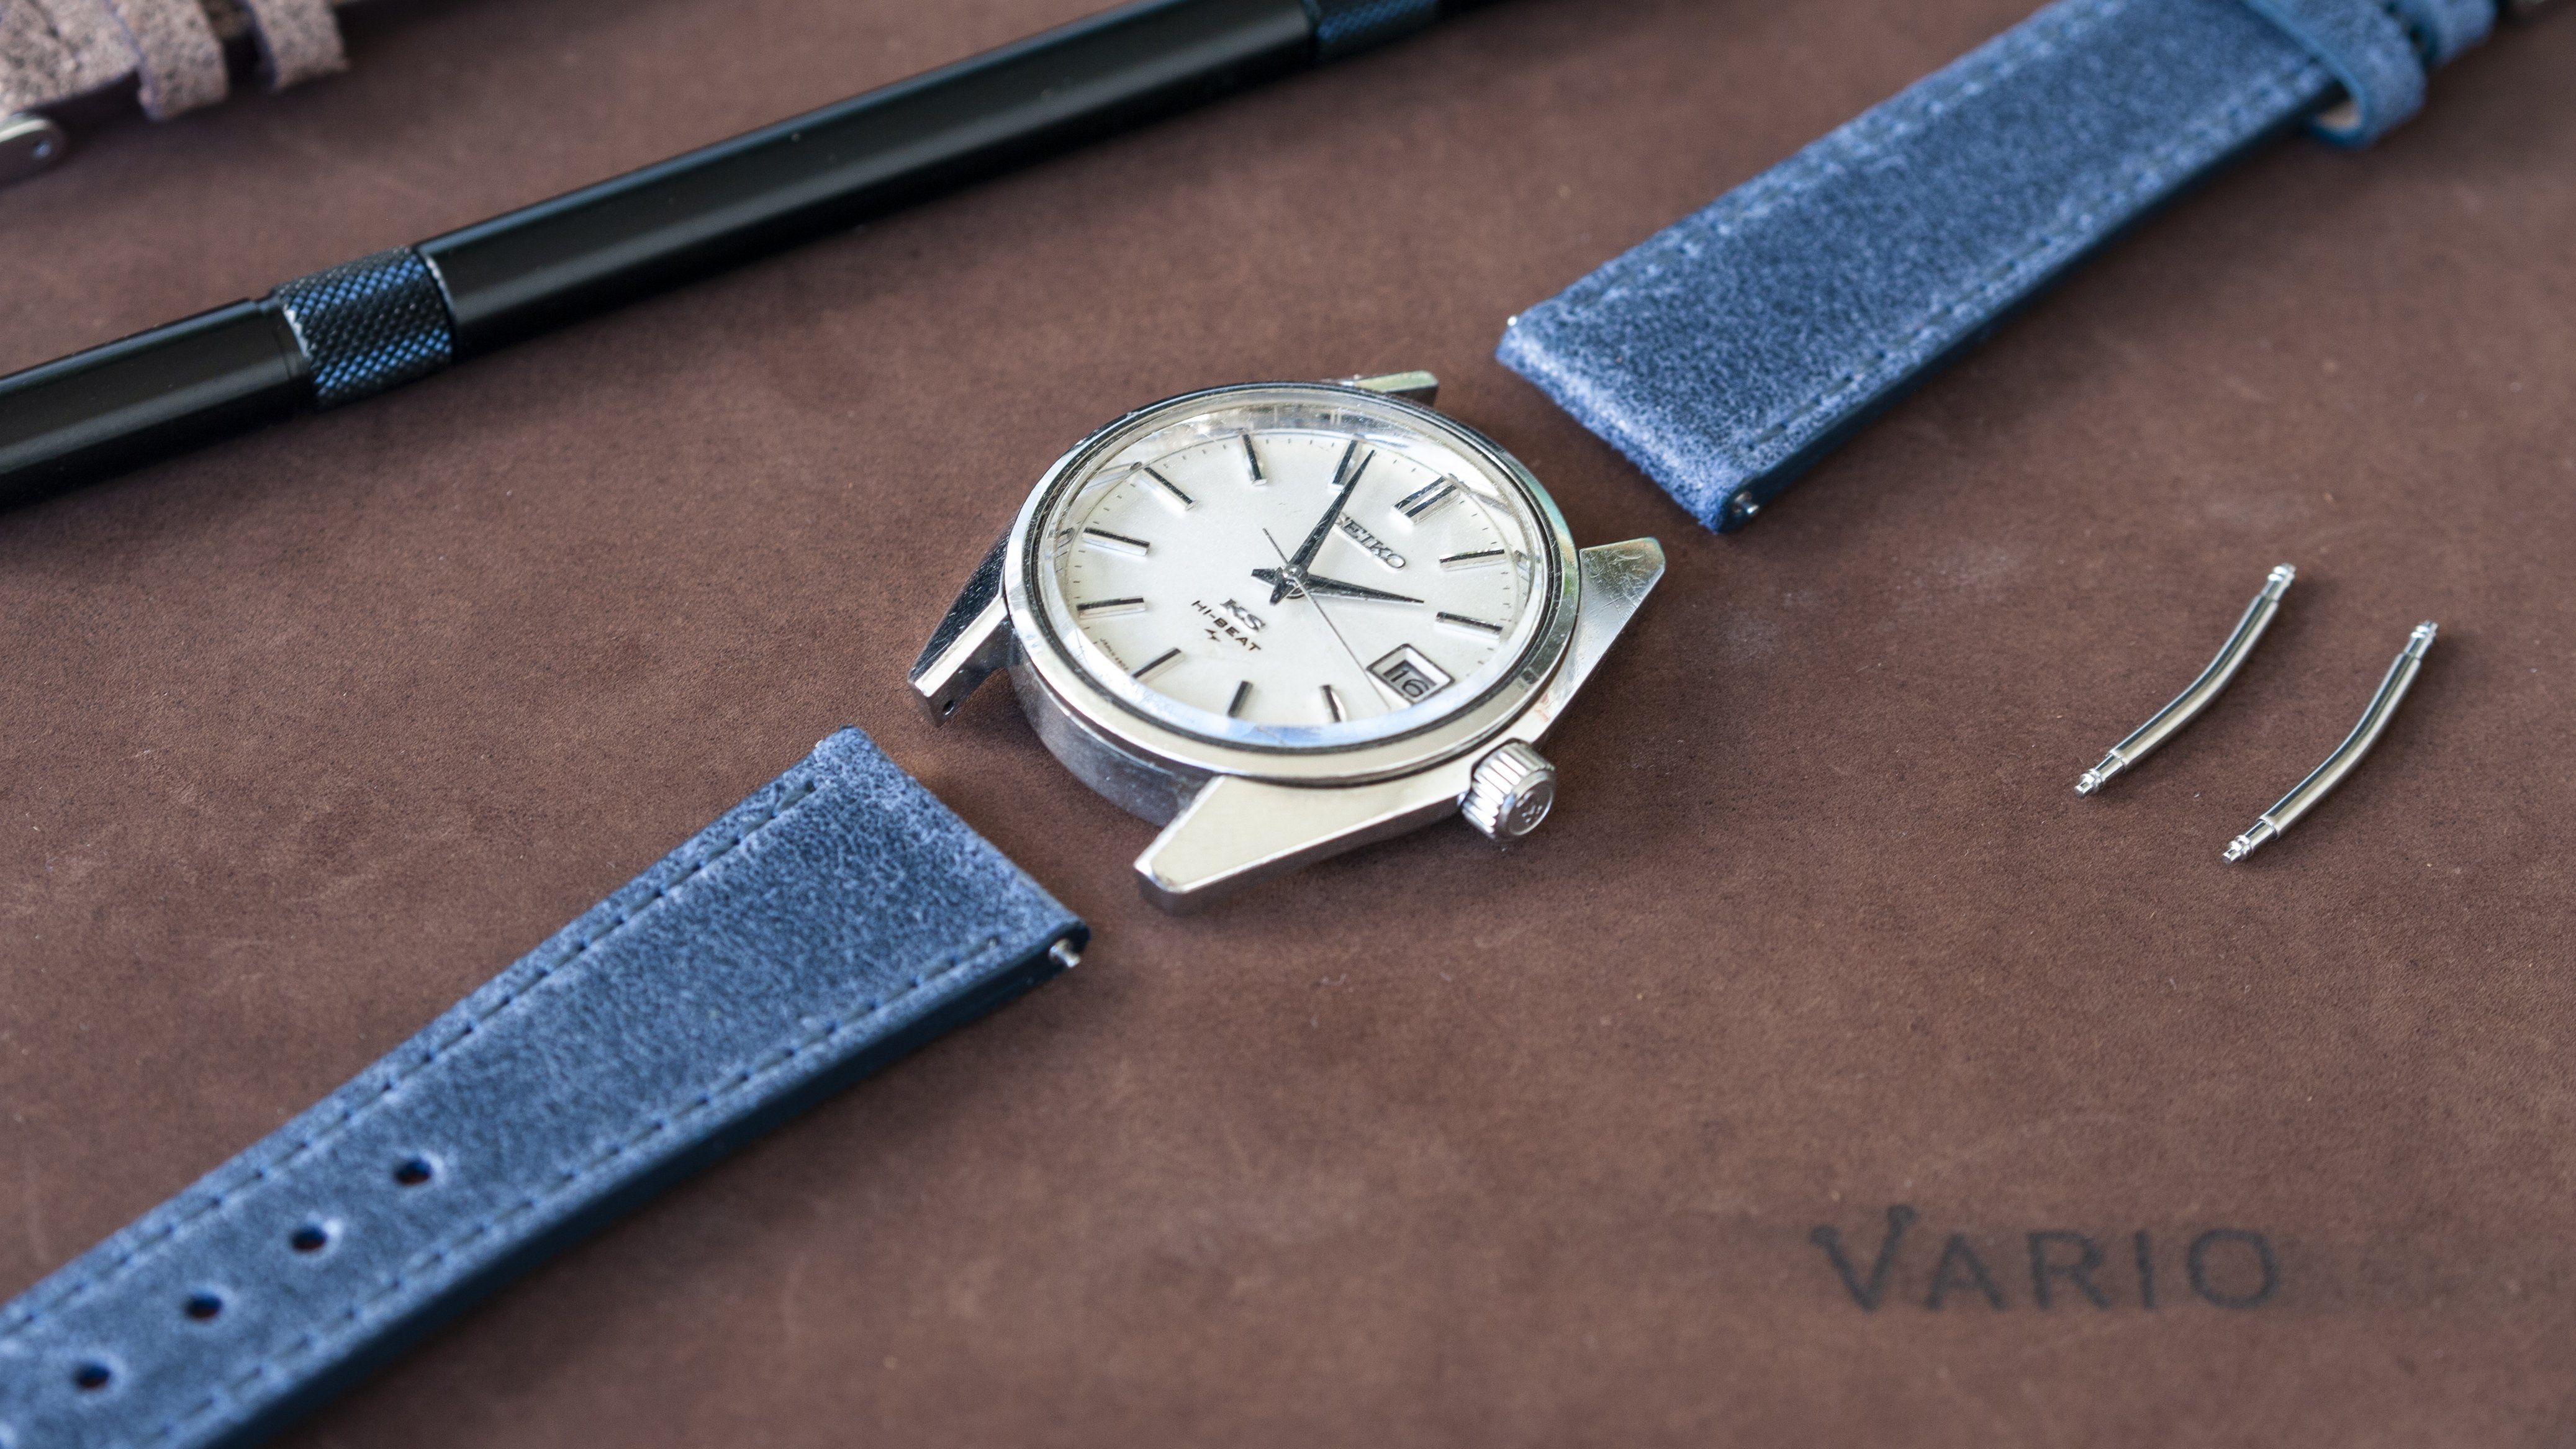 vario distressed italian leather watch band